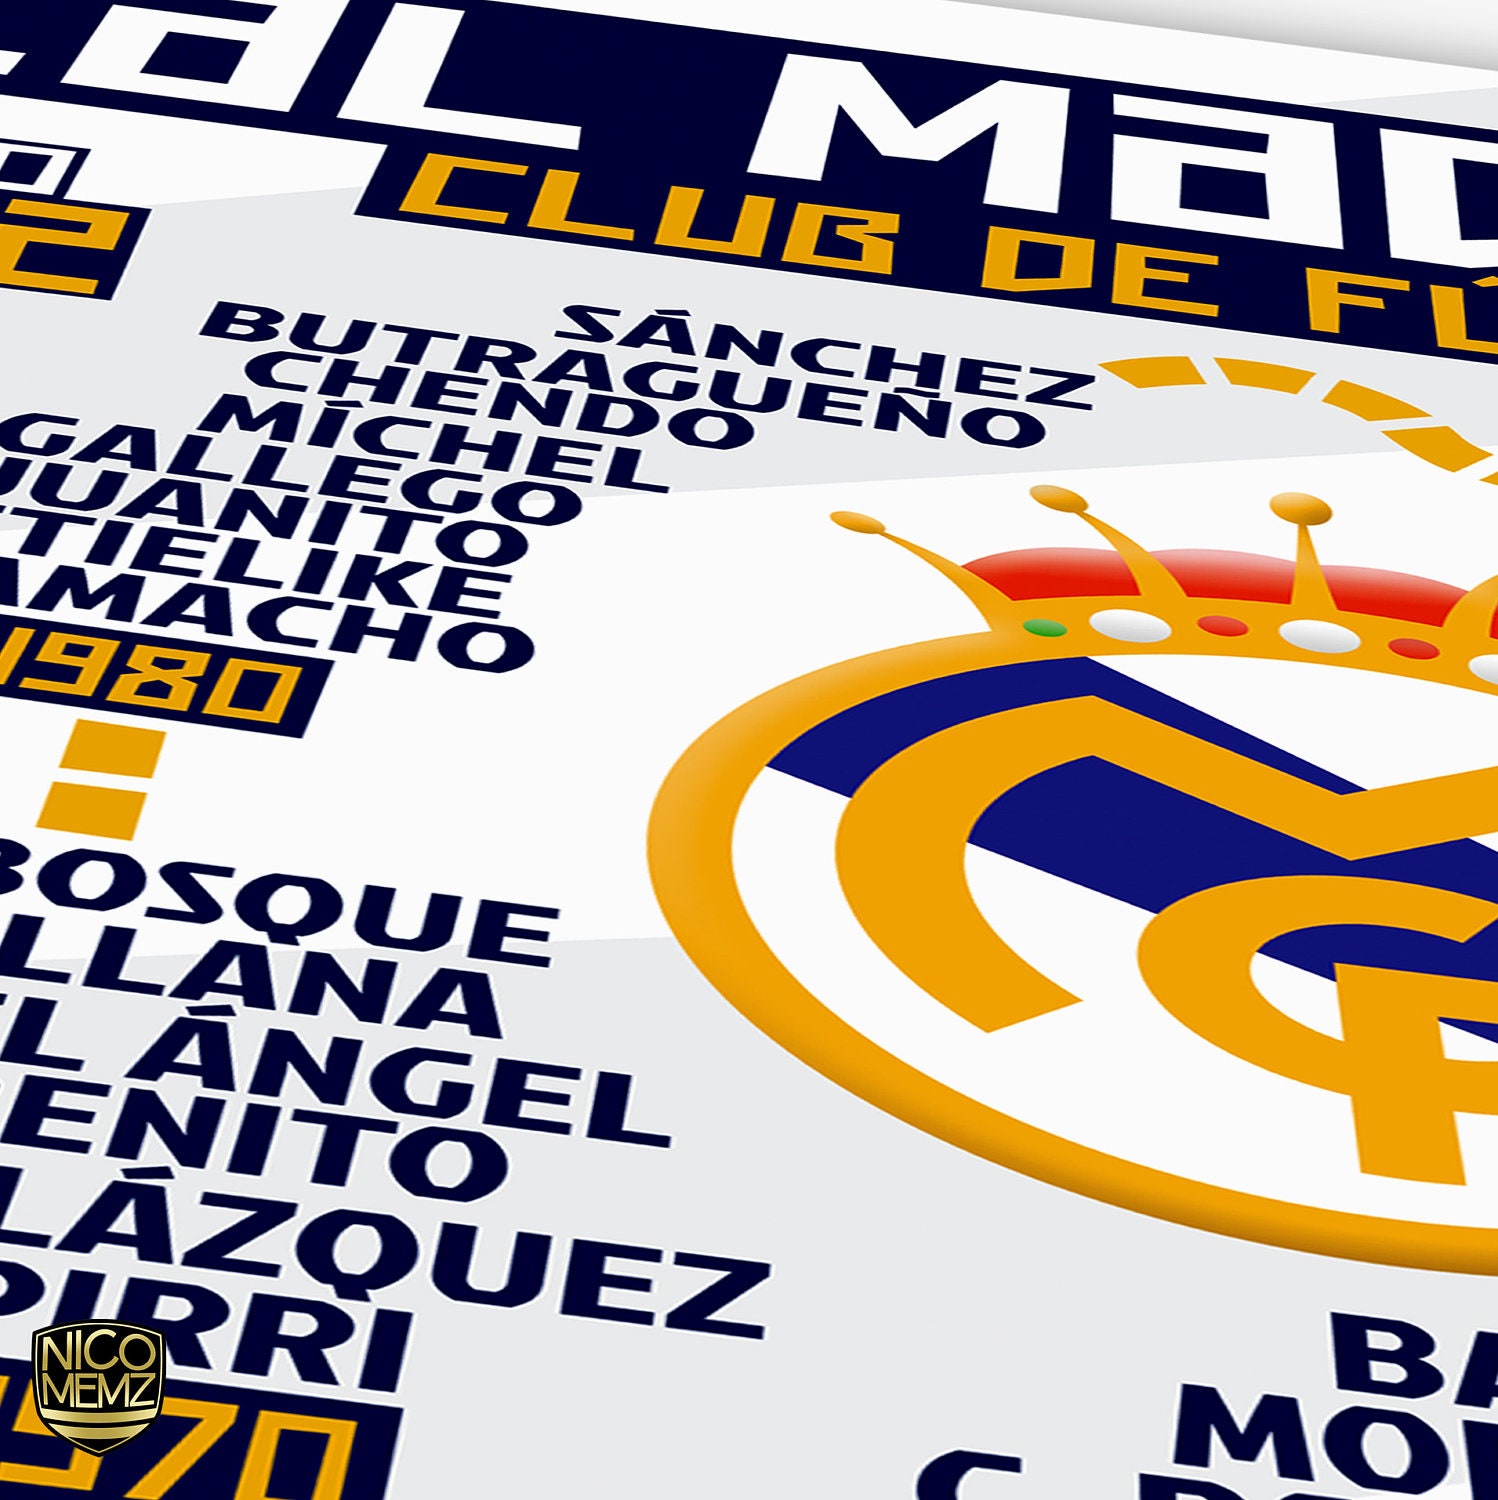 Poster Equipo Real Madrid – Movie Poster Mexico